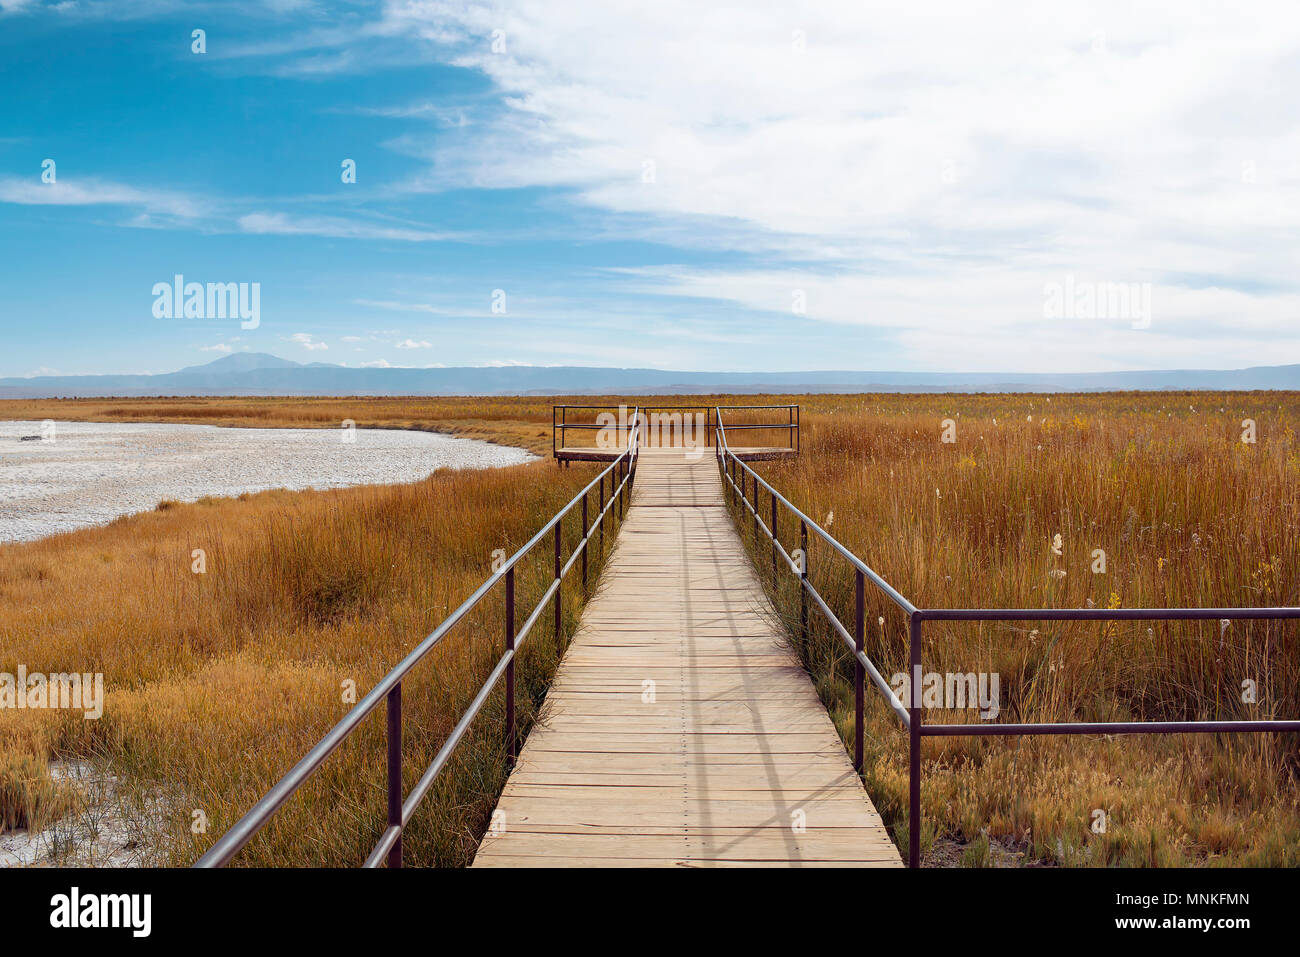 Minimalistic landscape with wooden walkway at Laguna Cejar, Chile Stock Photo